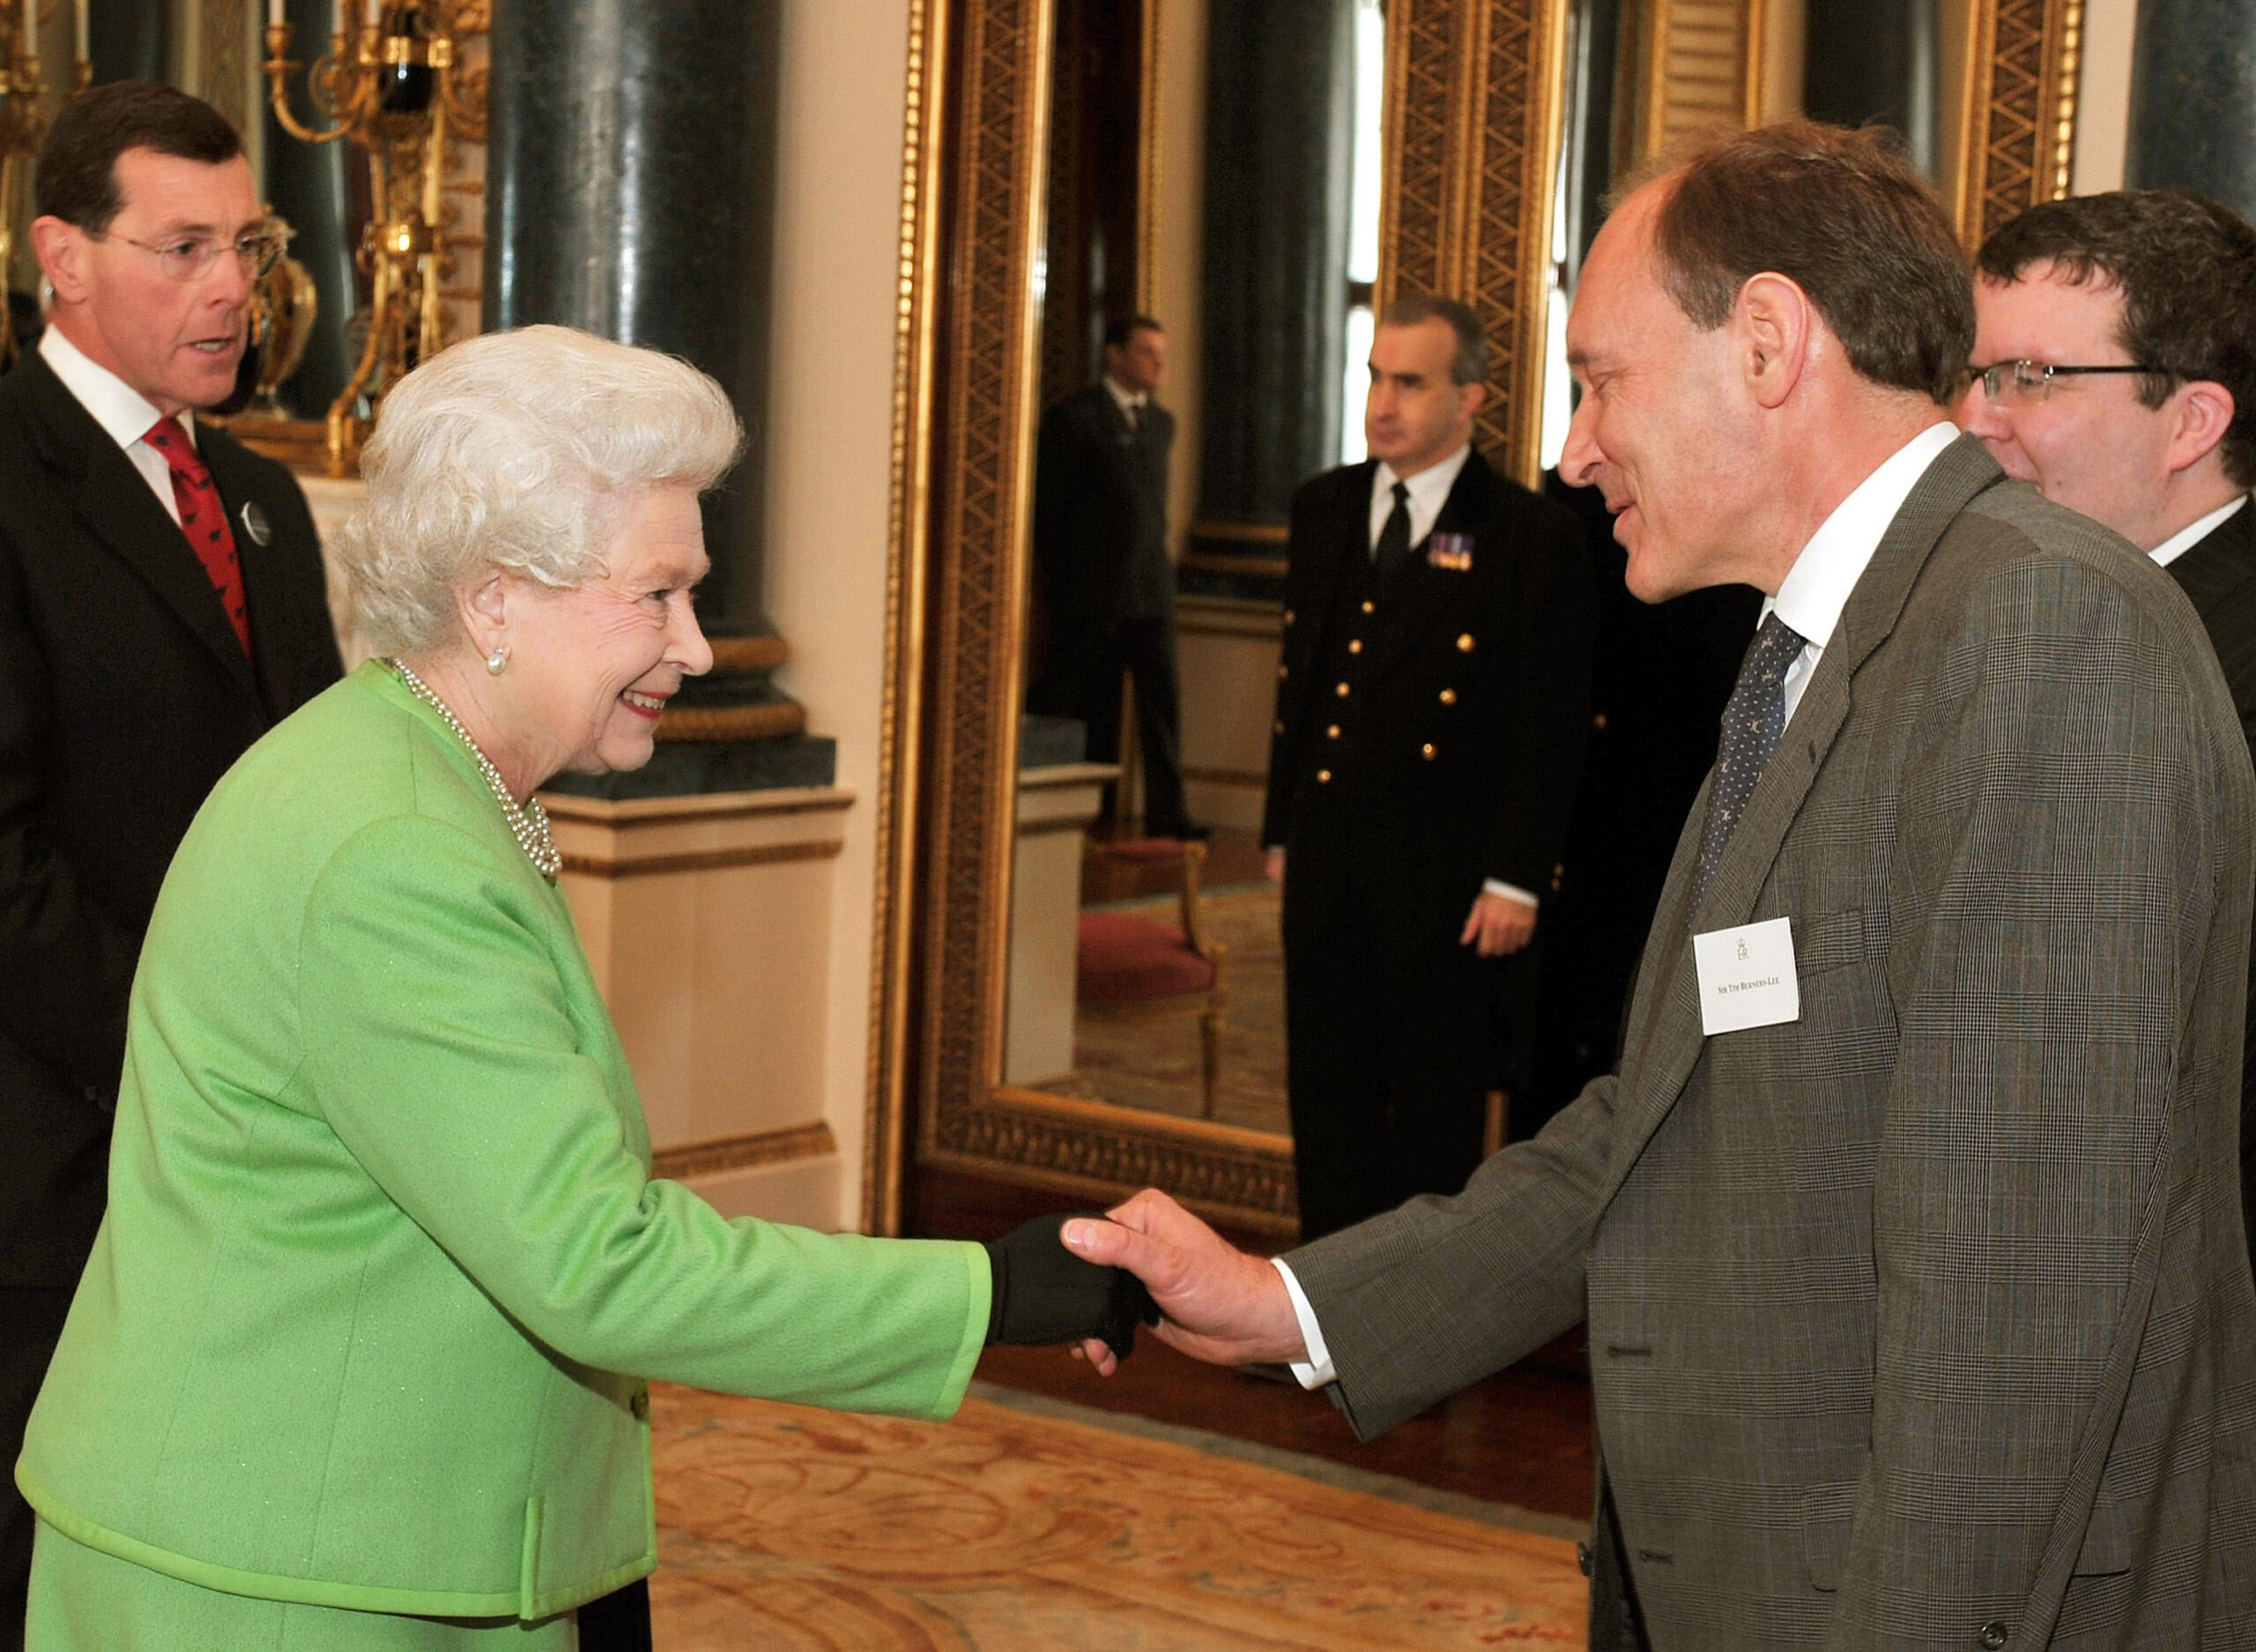 The most recently departed Queen Elizabeth II, giving Sir Tim Berners-Lee, who invented the World Wide Web, some SEO tips at an event for the relaunch of the Monarchy website (www.royal.gov.uk). (Credit: John Stillwell/WPA Pool/Getty Images)